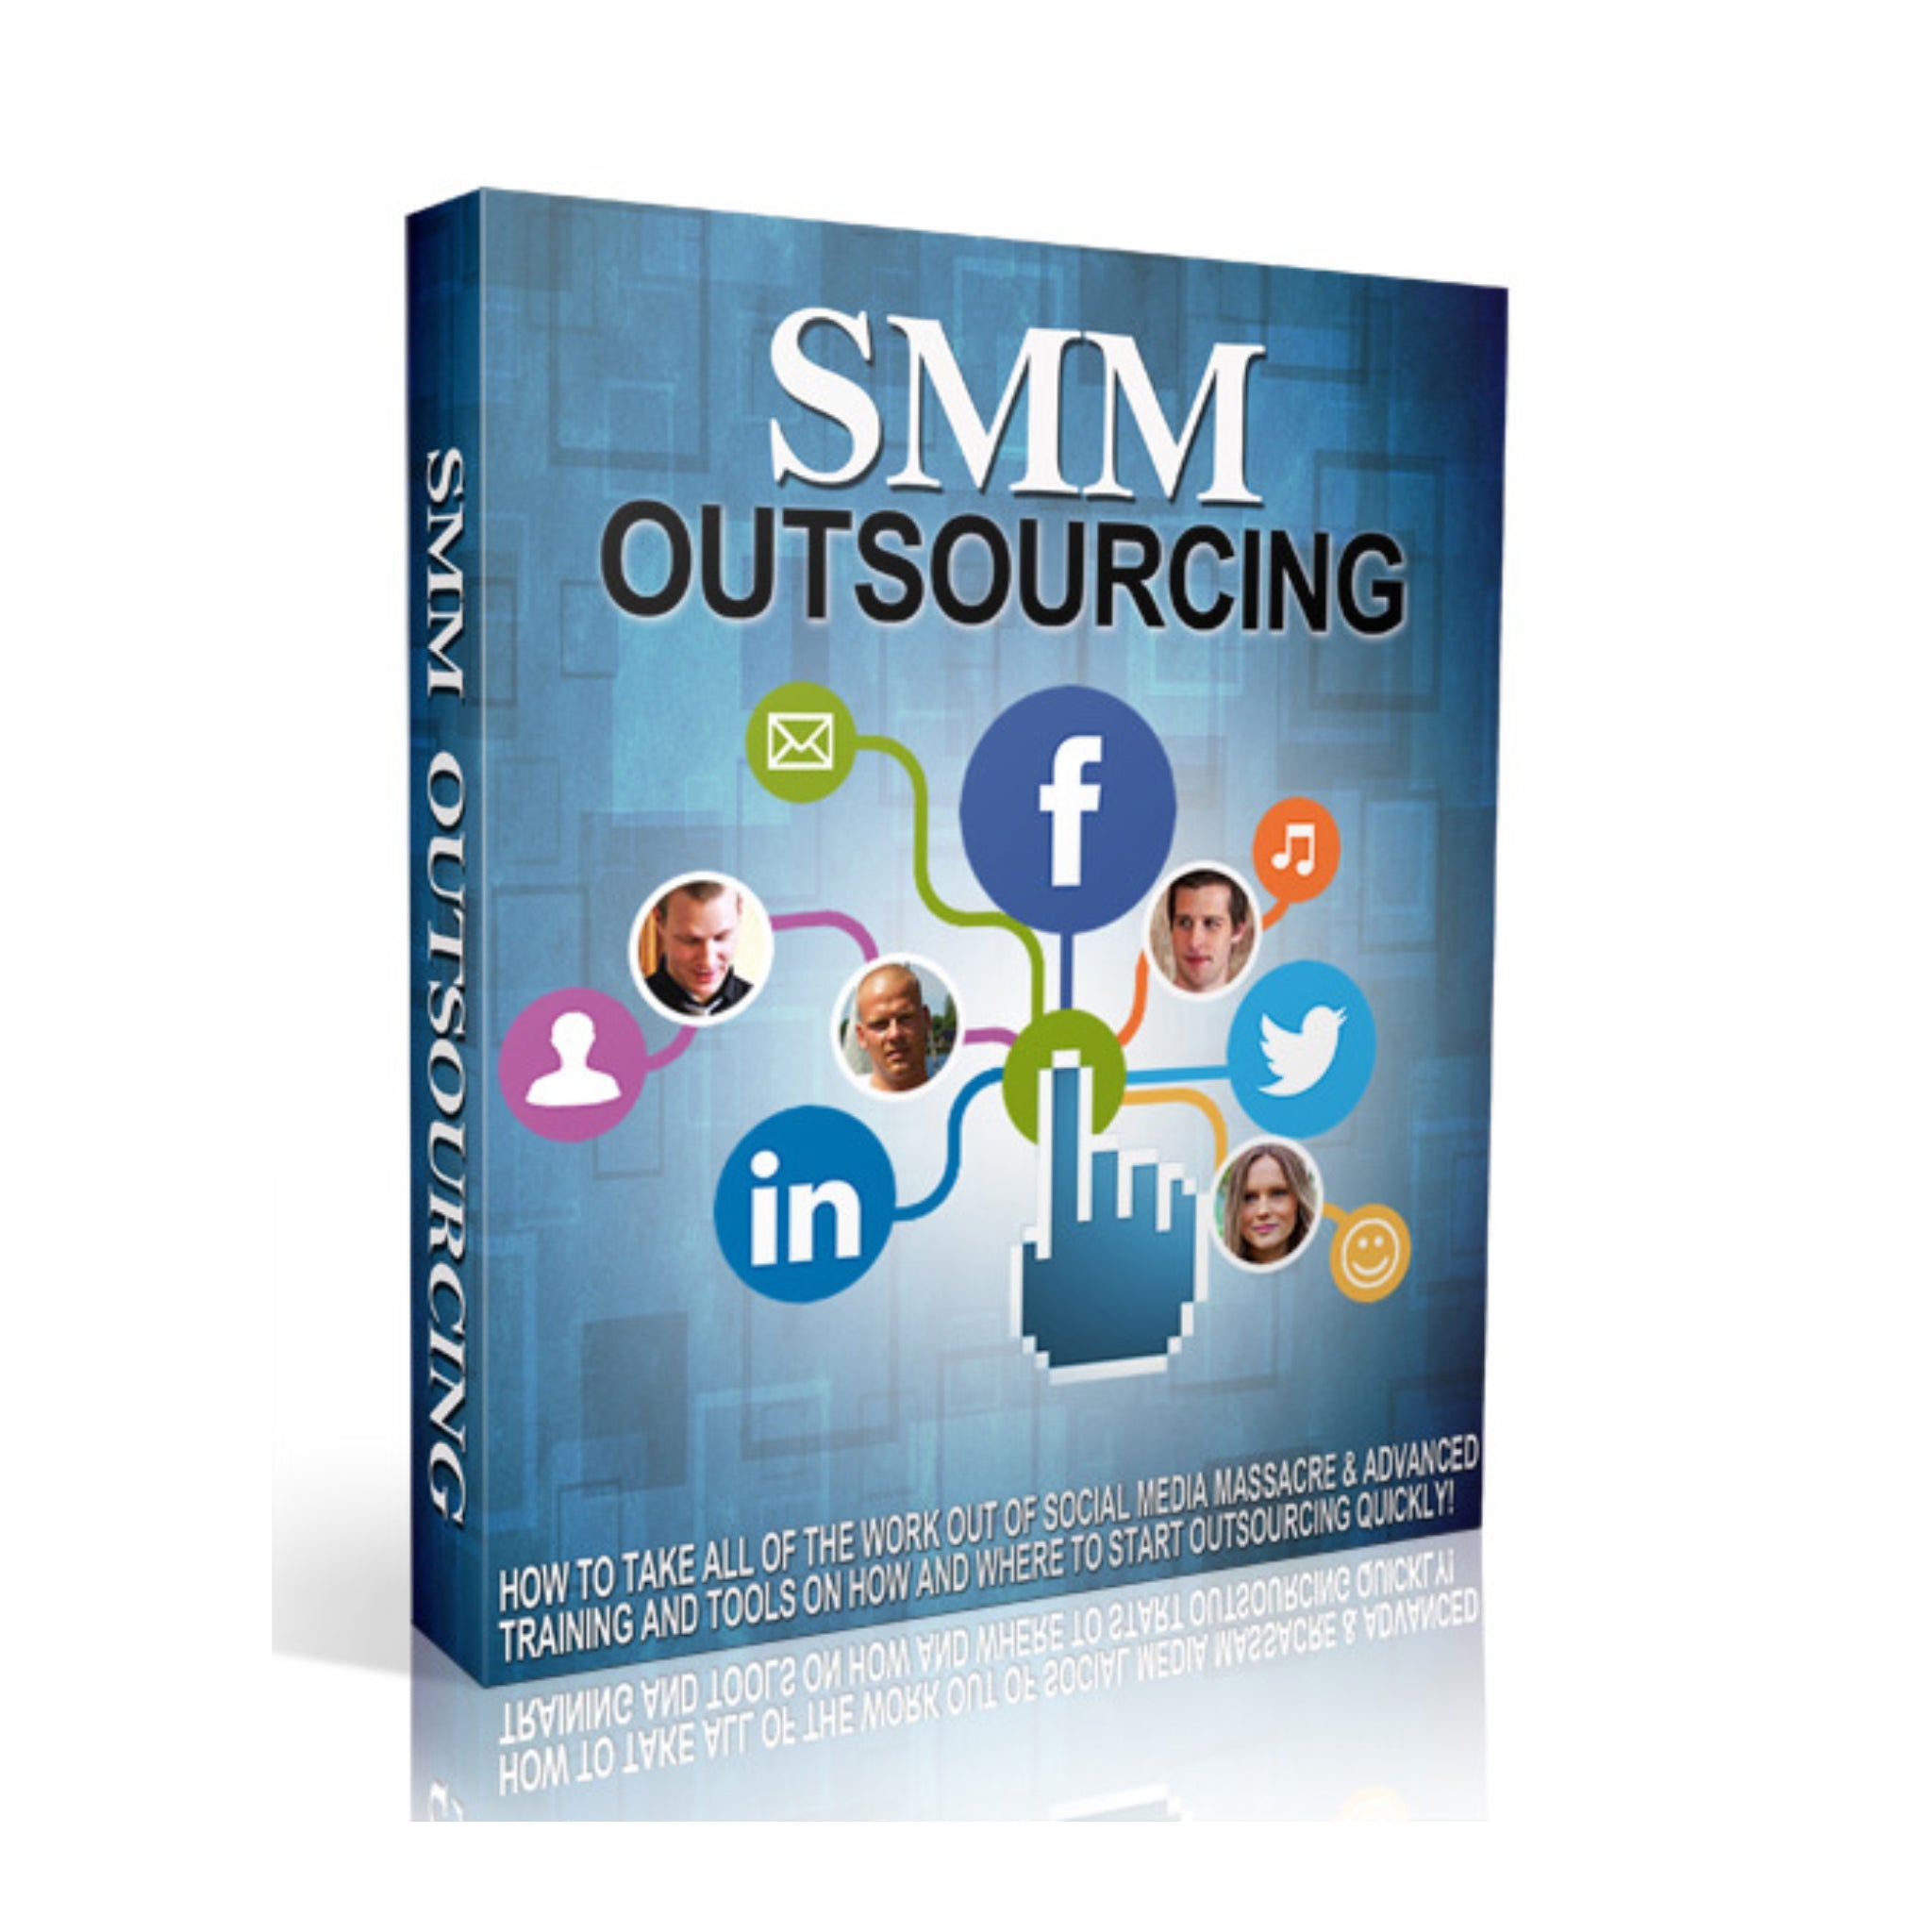 SMM Outsourcing Video Guide